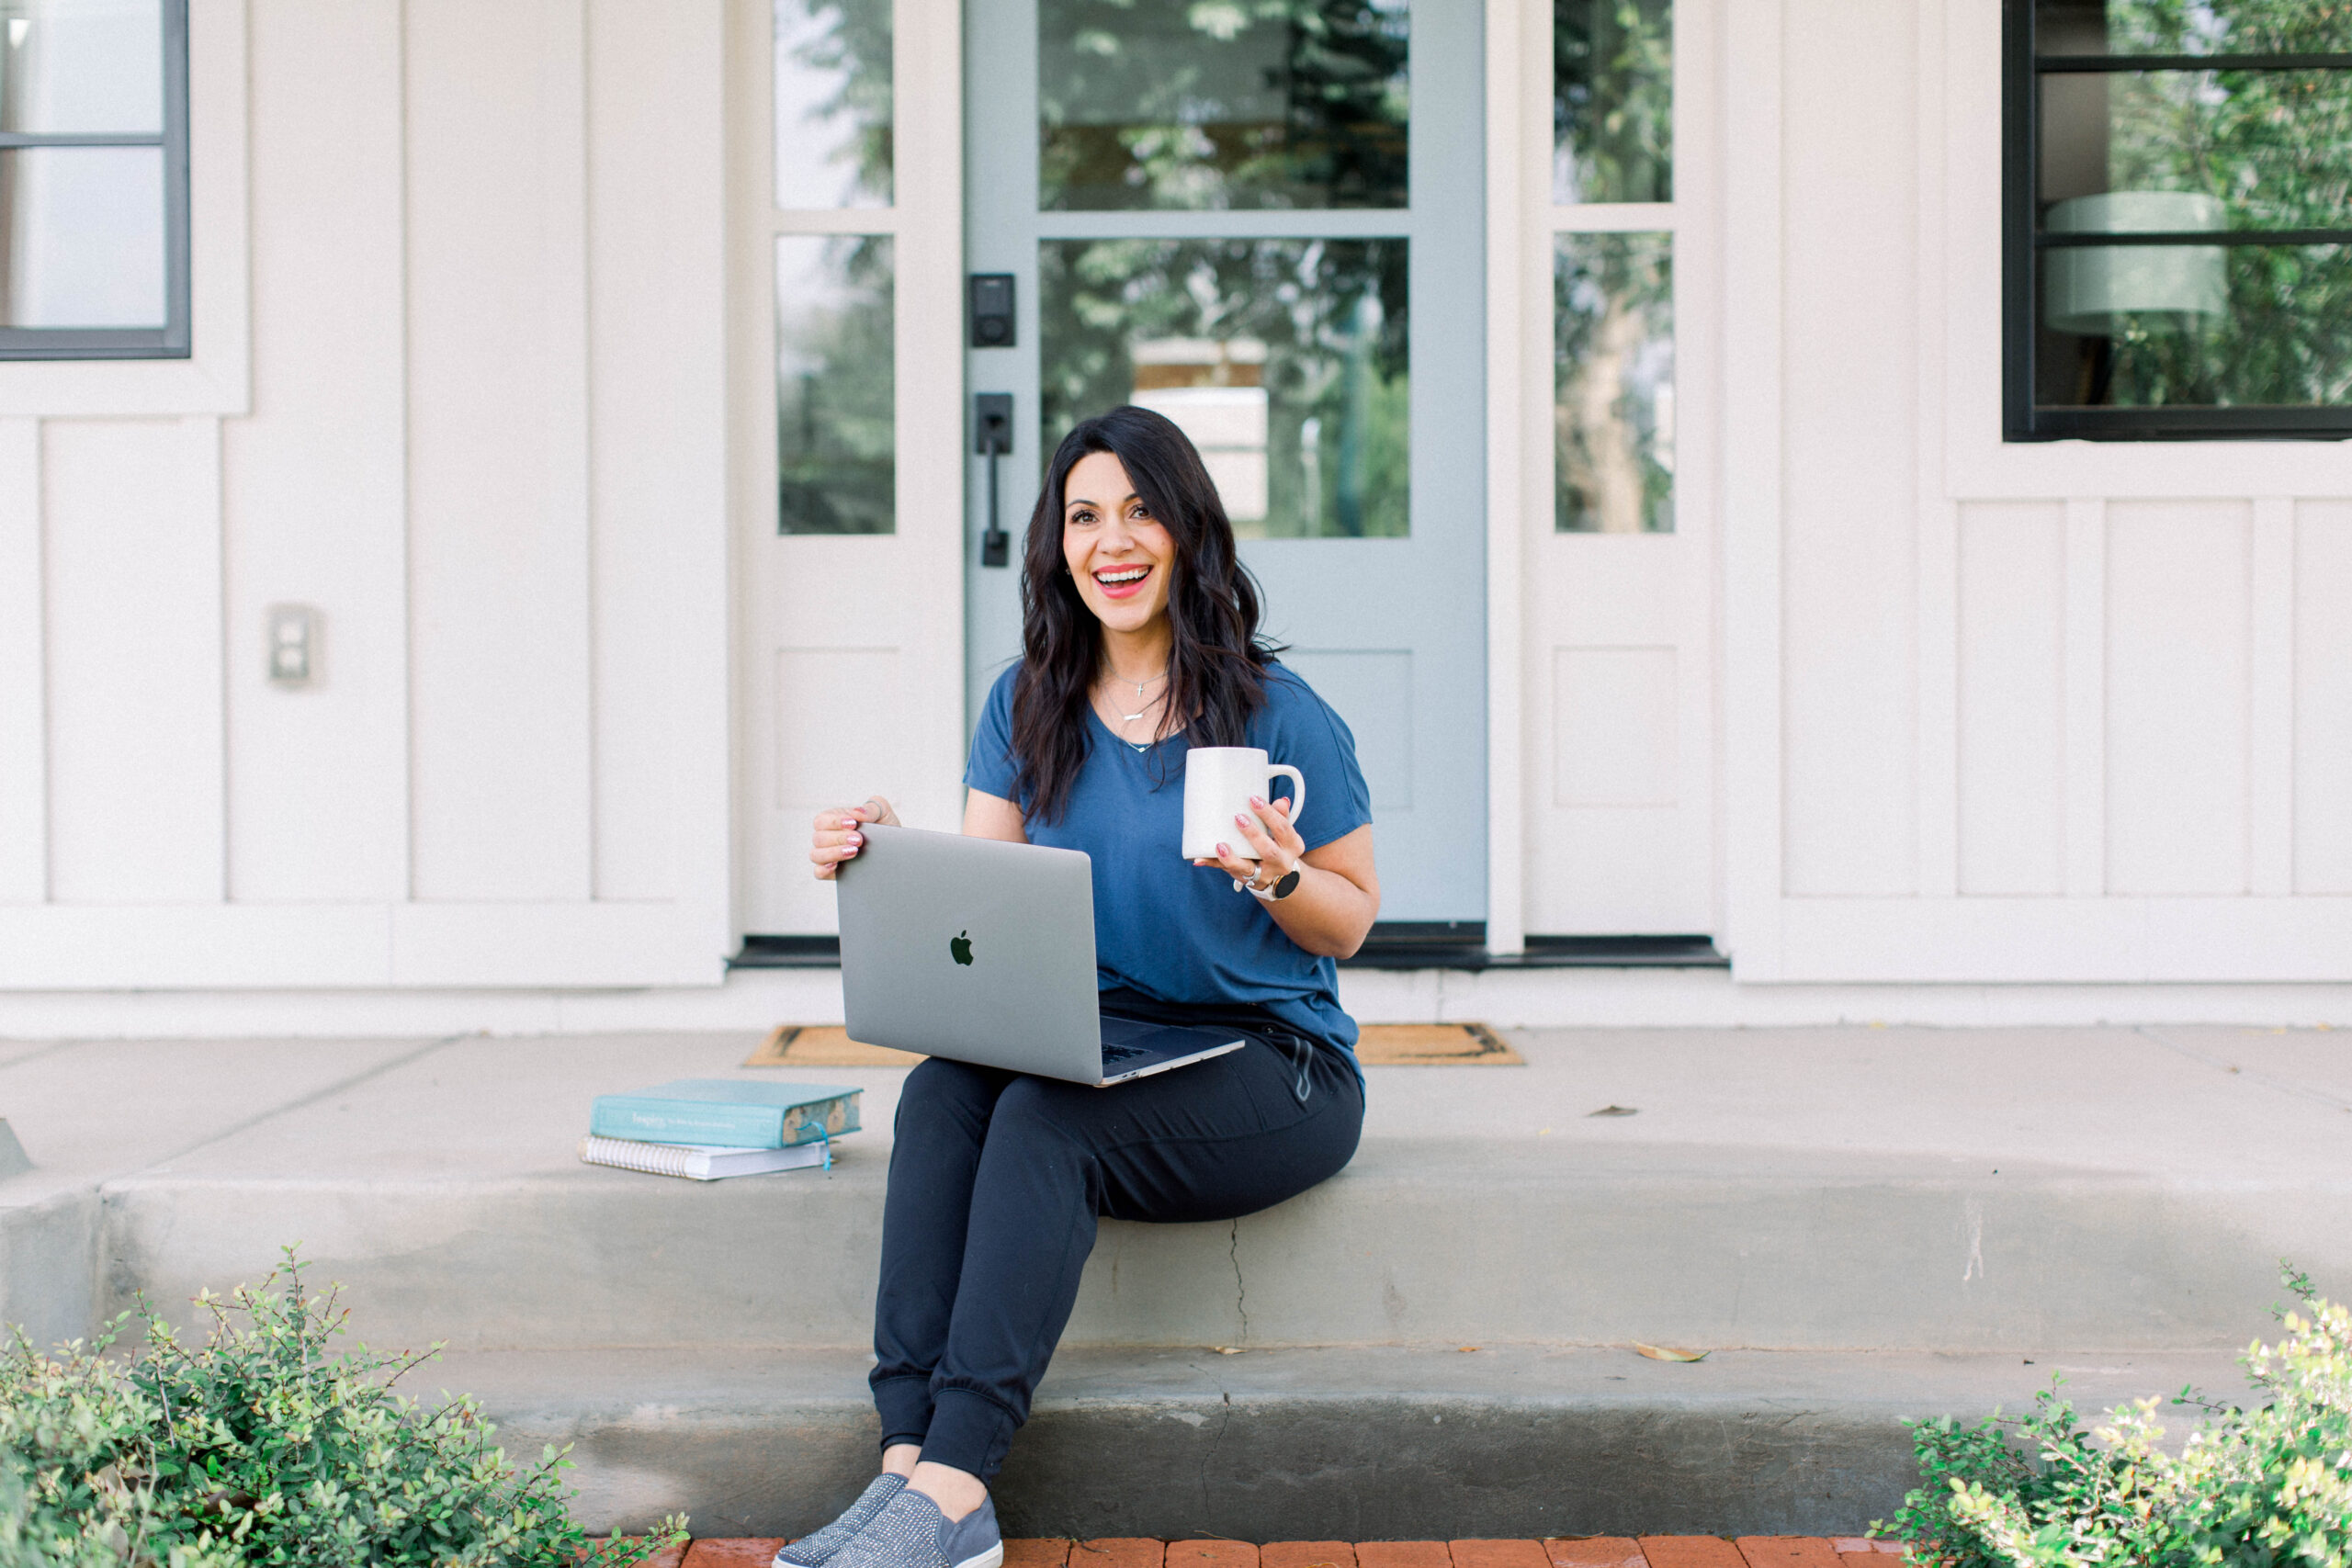 Dark haired woman sitting on a step in front of her door, with her laptop and mug of coffee.